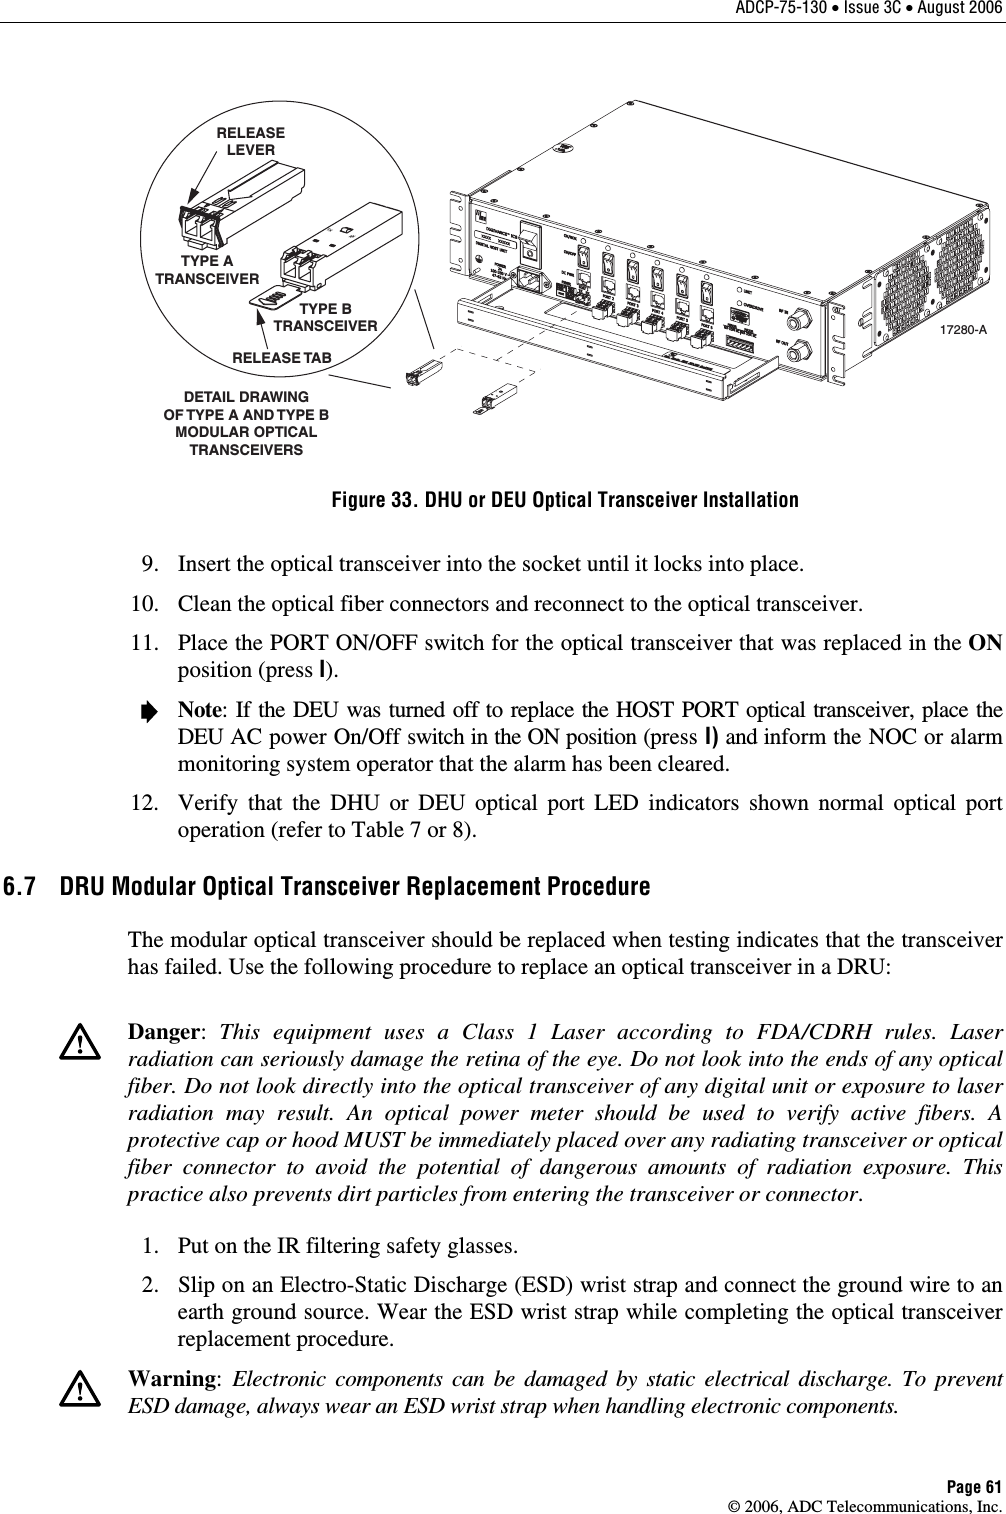 ADCP-75-130 • Issue 3C • August 2006 Page 61 © 2006, ADC Telecommunications, Inc. TXRXDETAIL DRAWINGOF TYPE A AND TYPE BMODULAR OPTICALTRANSCEIVERSTX RXTYPE ATRANSCEIVERTYPE BTRANSCEIVERRELEASELEVERRELEASE TAB17280-A Figure 33. DHU or DEU Optical Transceiver Installation   9.  Insert the optical transceiver into the socket until it locks into place.   10.  Clean the optical fiber connectors and reconnect to the optical transceiver.   11.  Place the PORT ON/OFF switch for the optical transceiver that was replaced in the ON position (press I).    Note: If the DEU was turned off to replace the HOST PORT optical transceiver, place the DEU AC power On/Off switch in the ON position (press I) and inform the NOC or alarm monitoring system operator that the alarm has been cleared.   12.  Verify that the DHU or DEU optical port LED indicators shown normal optical port operation (refer to Table 7 or 8).  6.7  DRU Modular Optical Transceiver Replacement Procedure The modular optical transceiver should be replaced when testing indicates that the transceiver has failed. Use the following procedure to replace an optical transceiver in a DRU:    Danger:  This equipment uses a Class 1 Laser according to FDA/CDRH rules. Laser radiation can seriously damage the retina of the eye. Do not look into the ends of any optical fiber. Do not look directly into the optical transceiver of any digital unit or exposure to laser radiation may result. An optical power meter should be used to verify active fibers. A protective cap or hood MUST be immediately placed over any radiating transceiver or optical fiber connector to avoid the potential of dangerous amounts of radiation exposure. This practice also prevents dirt particles from entering the transceiver or connector.   1.  Put on the IR filtering safety glasses.    2.  Slip on an Electro-Static Discharge (ESD) wrist strap and connect the ground wire to an earth ground source. Wear the ESD wrist strap while completing the optical transceiver replacement procedure.    Warning:  Electronic components can be damaged by static electrical discharge. To prevent ESD damage, always wear an ESD wrist strap when handling electronic components.  